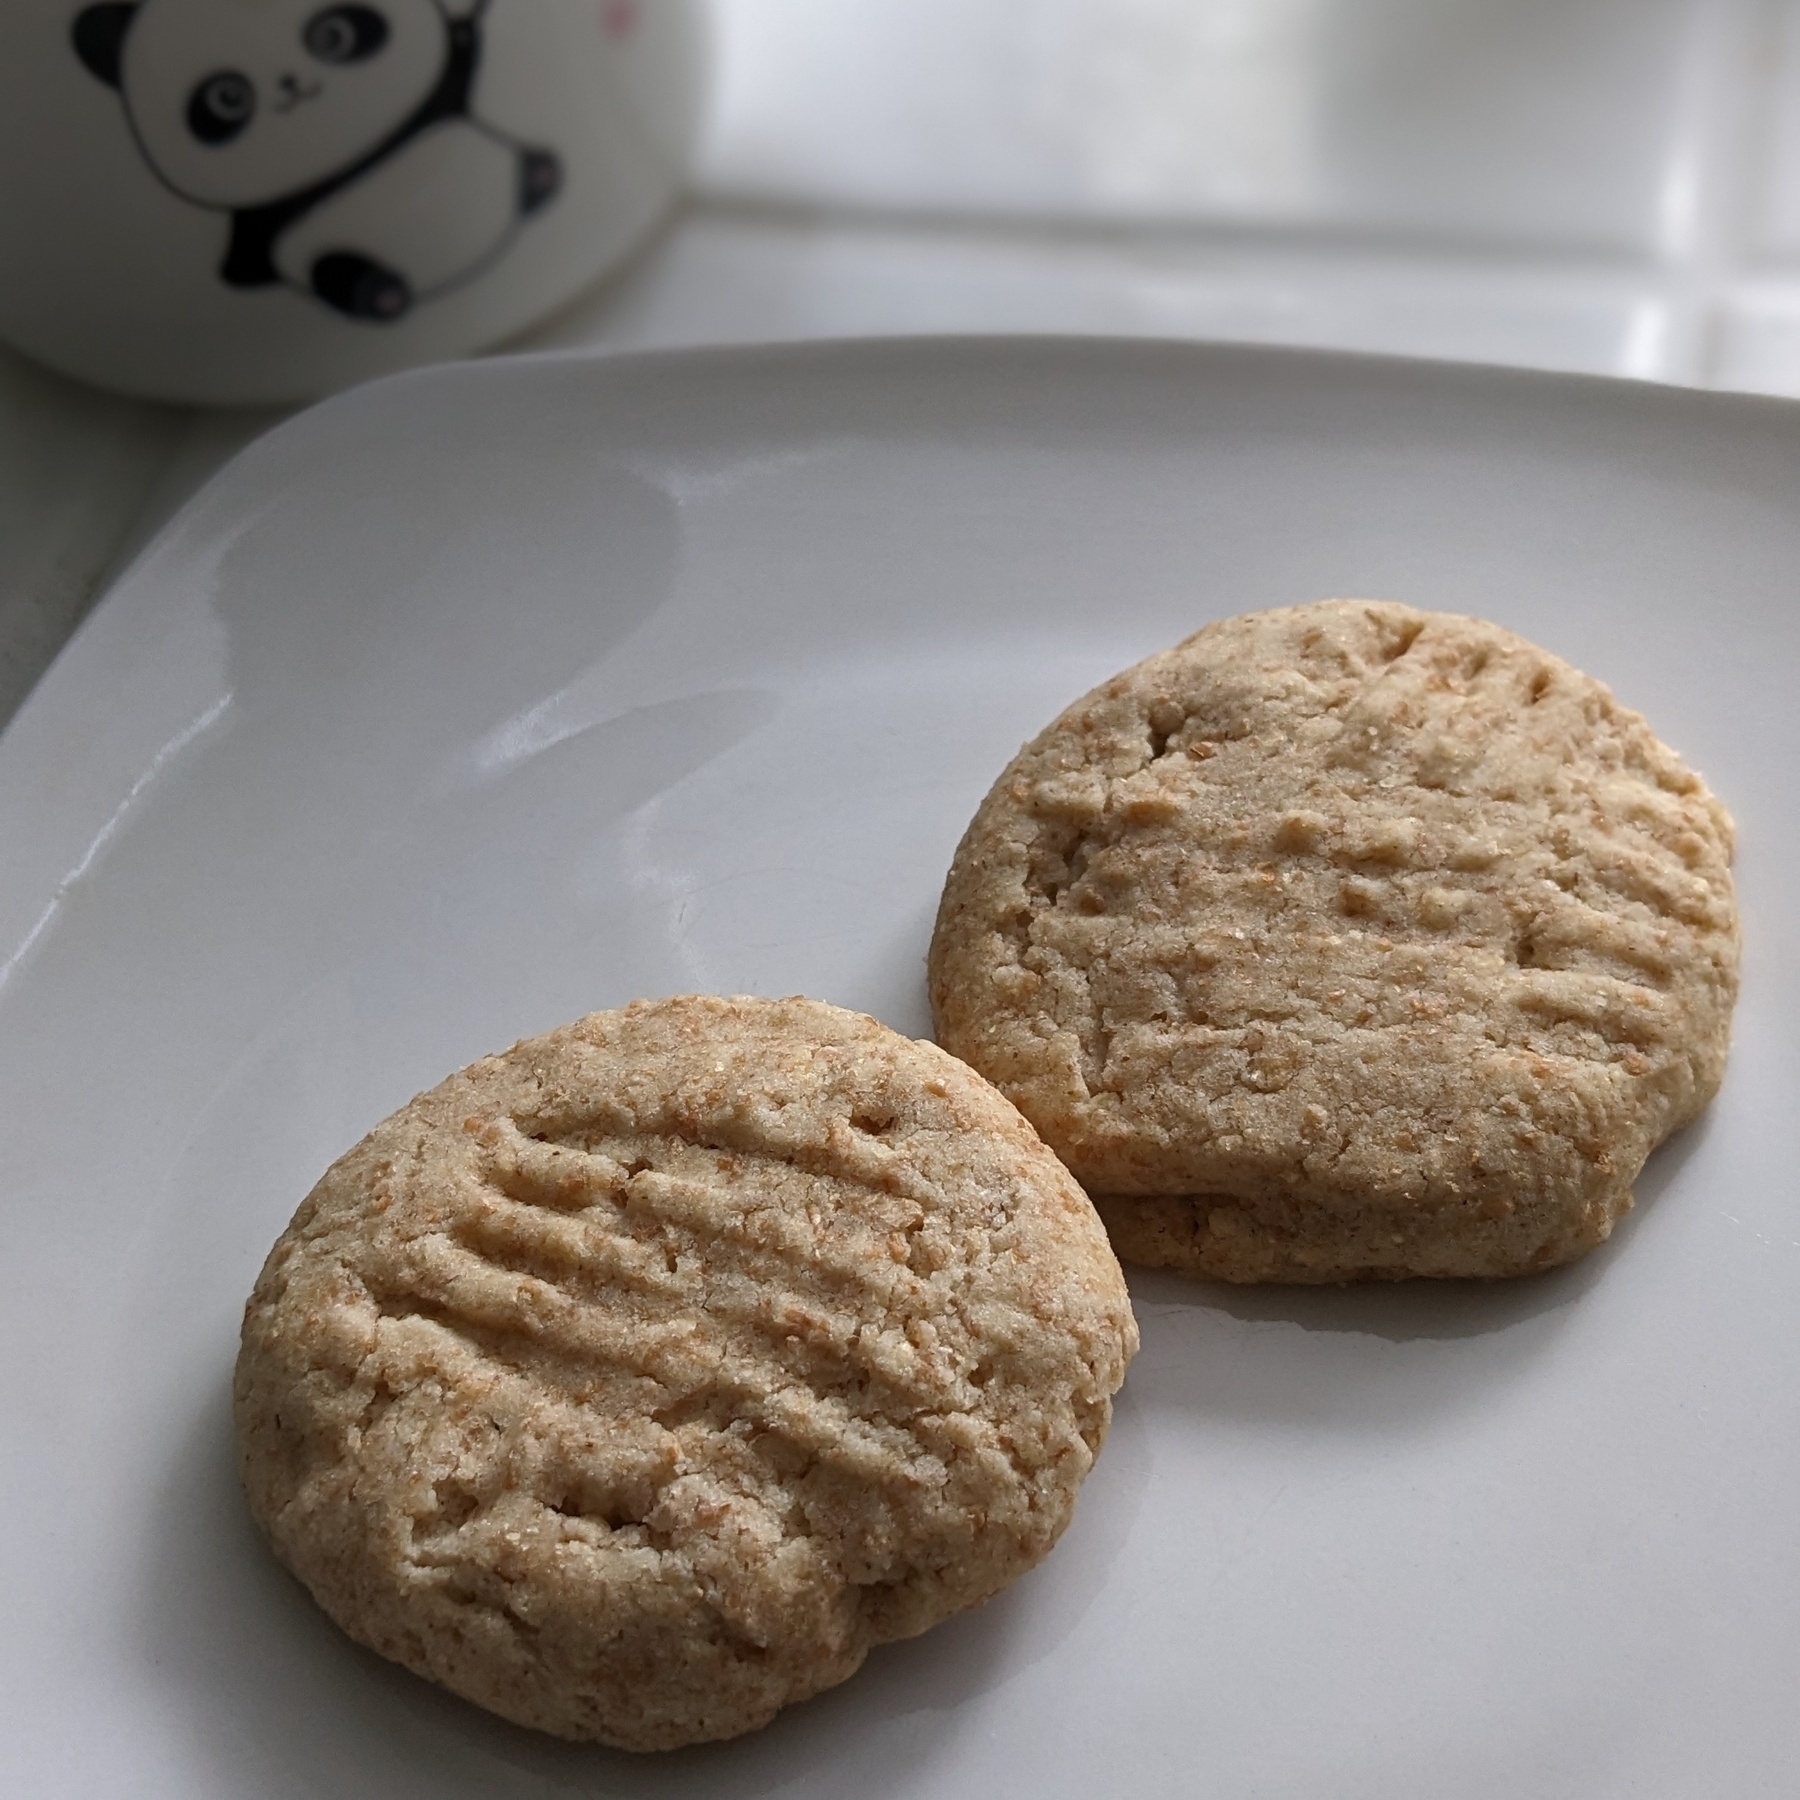 A photo of two light brown cookies sitting on a white plate. The cookies are homemade and have markings on top to show that they were pressed down with a fork. There is a white mug in the background with a cartoon panda on it.